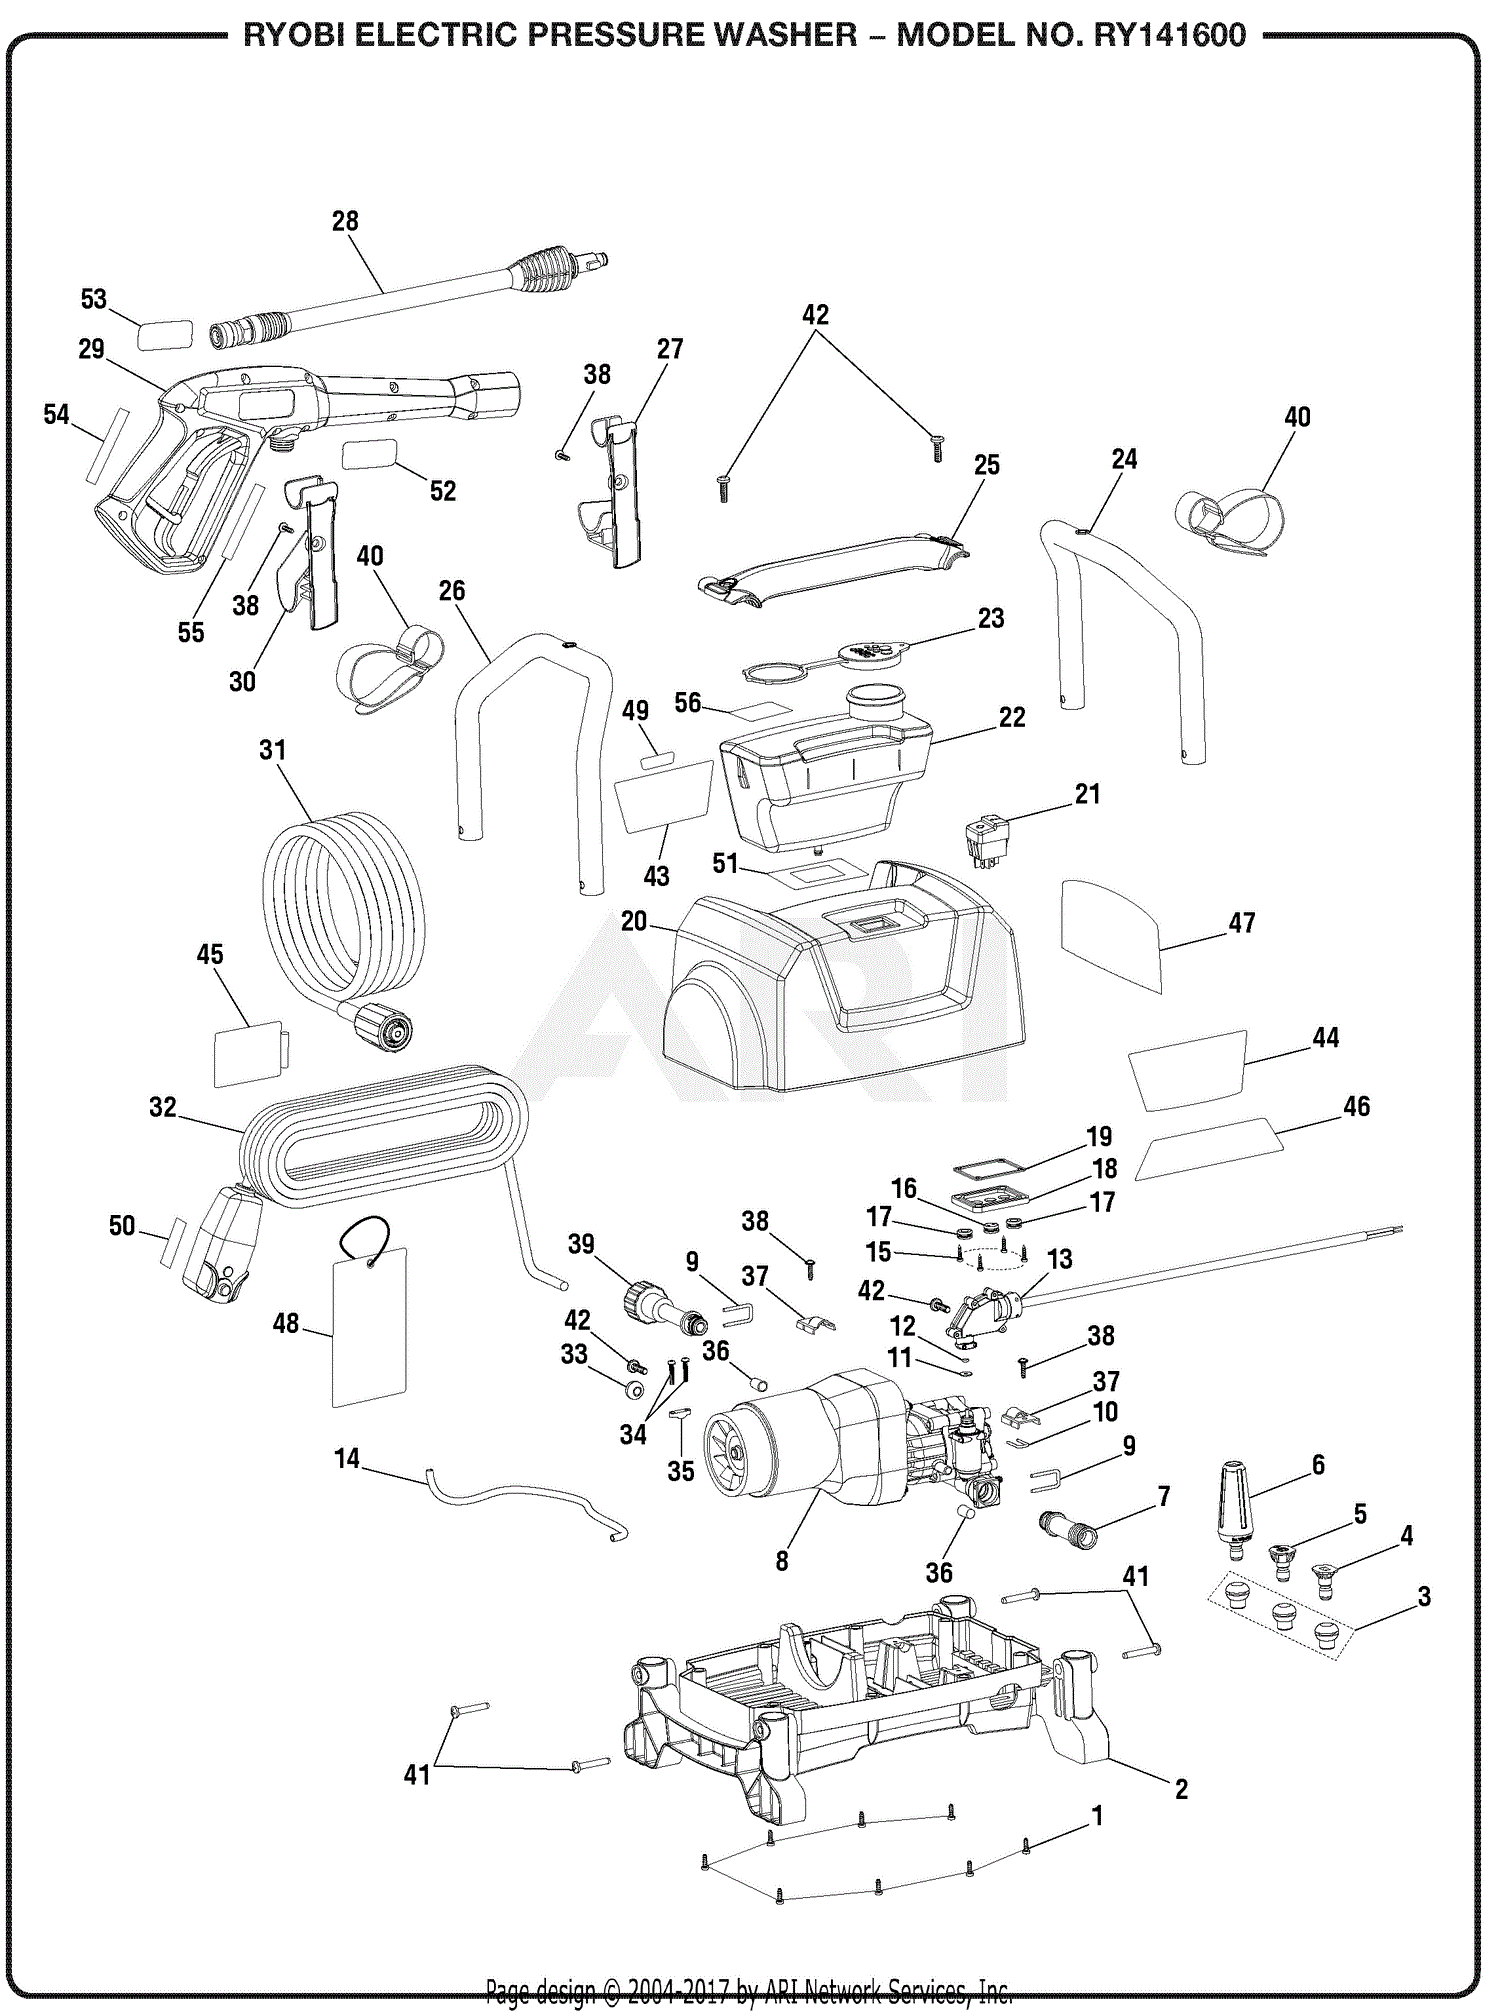 [DIAGRAM] Home Wiring Diagrams Switch Outlet FULL Version ... 1983 ford f 250 light switch diagram 